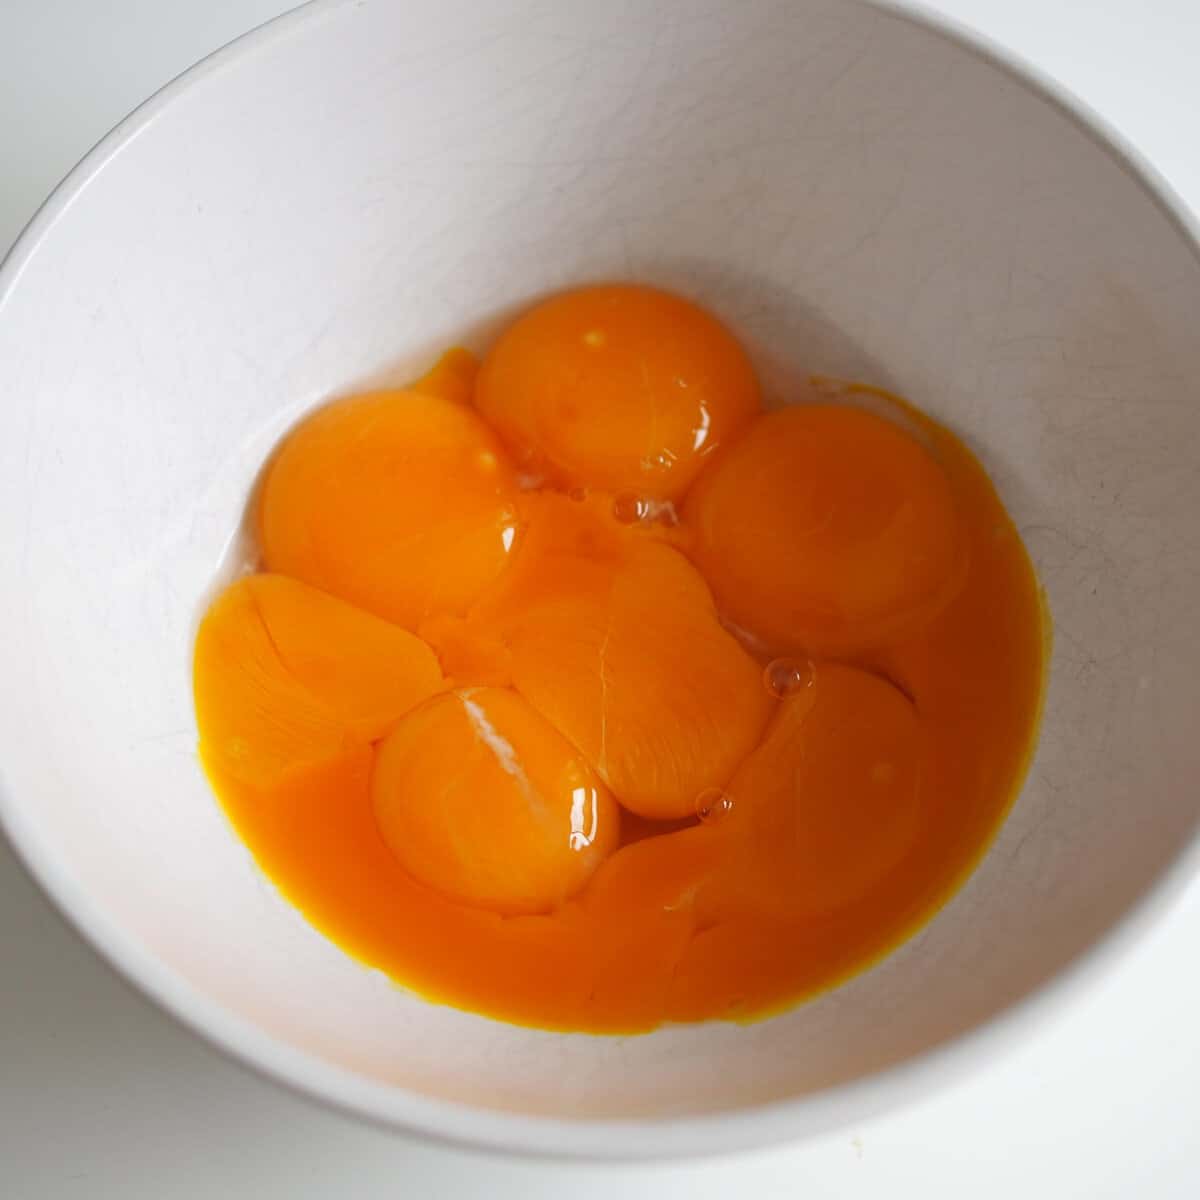 Separate egg yolks from whites